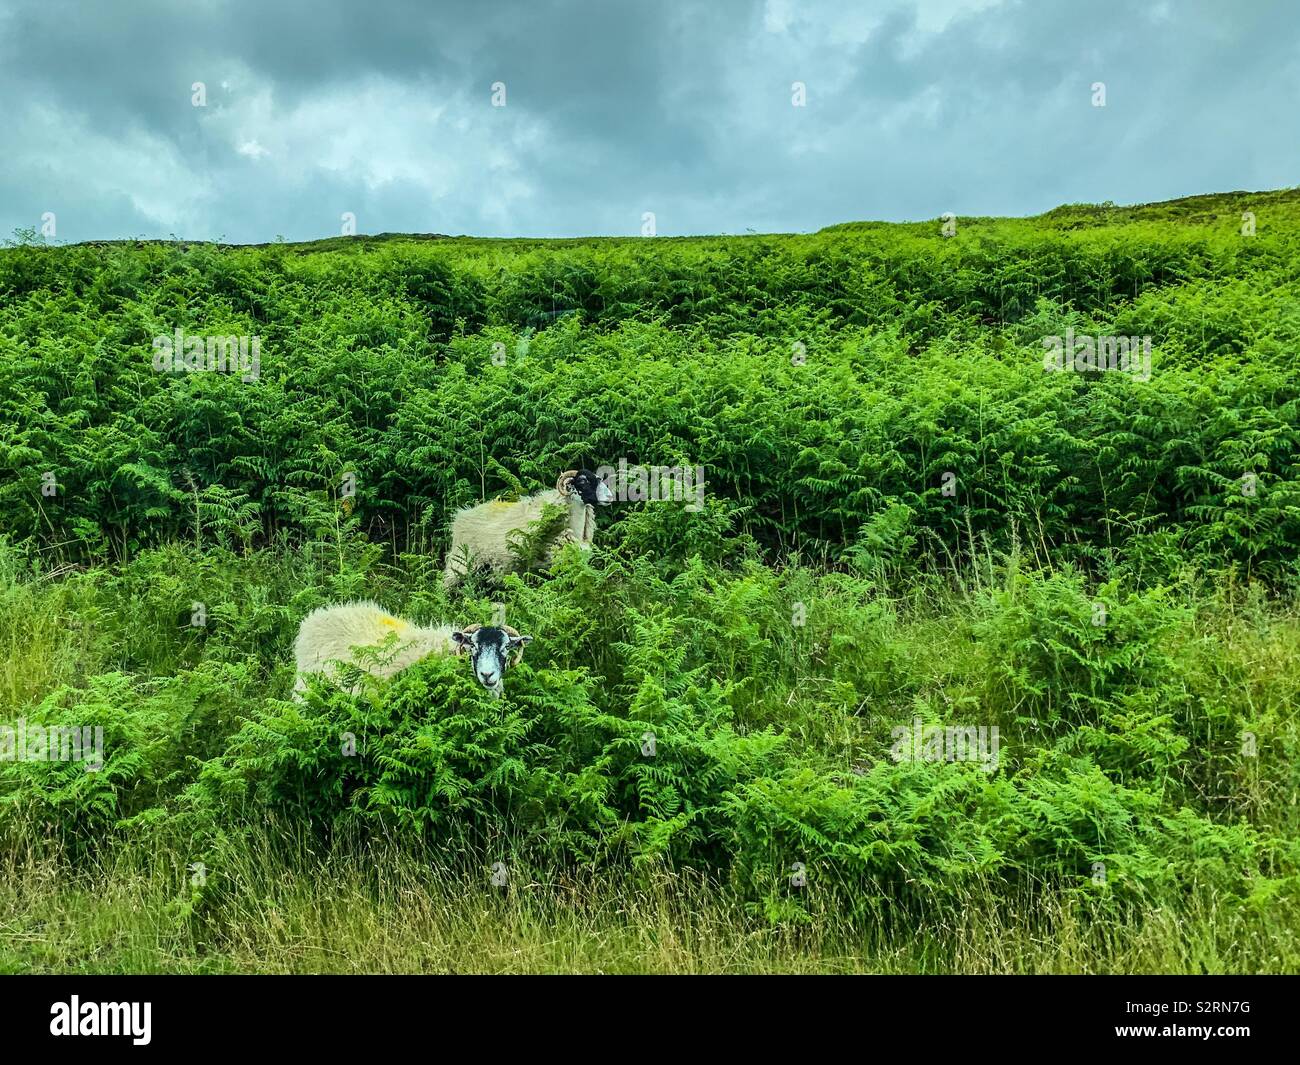 Goats and sheep in tall grass Stock Photo